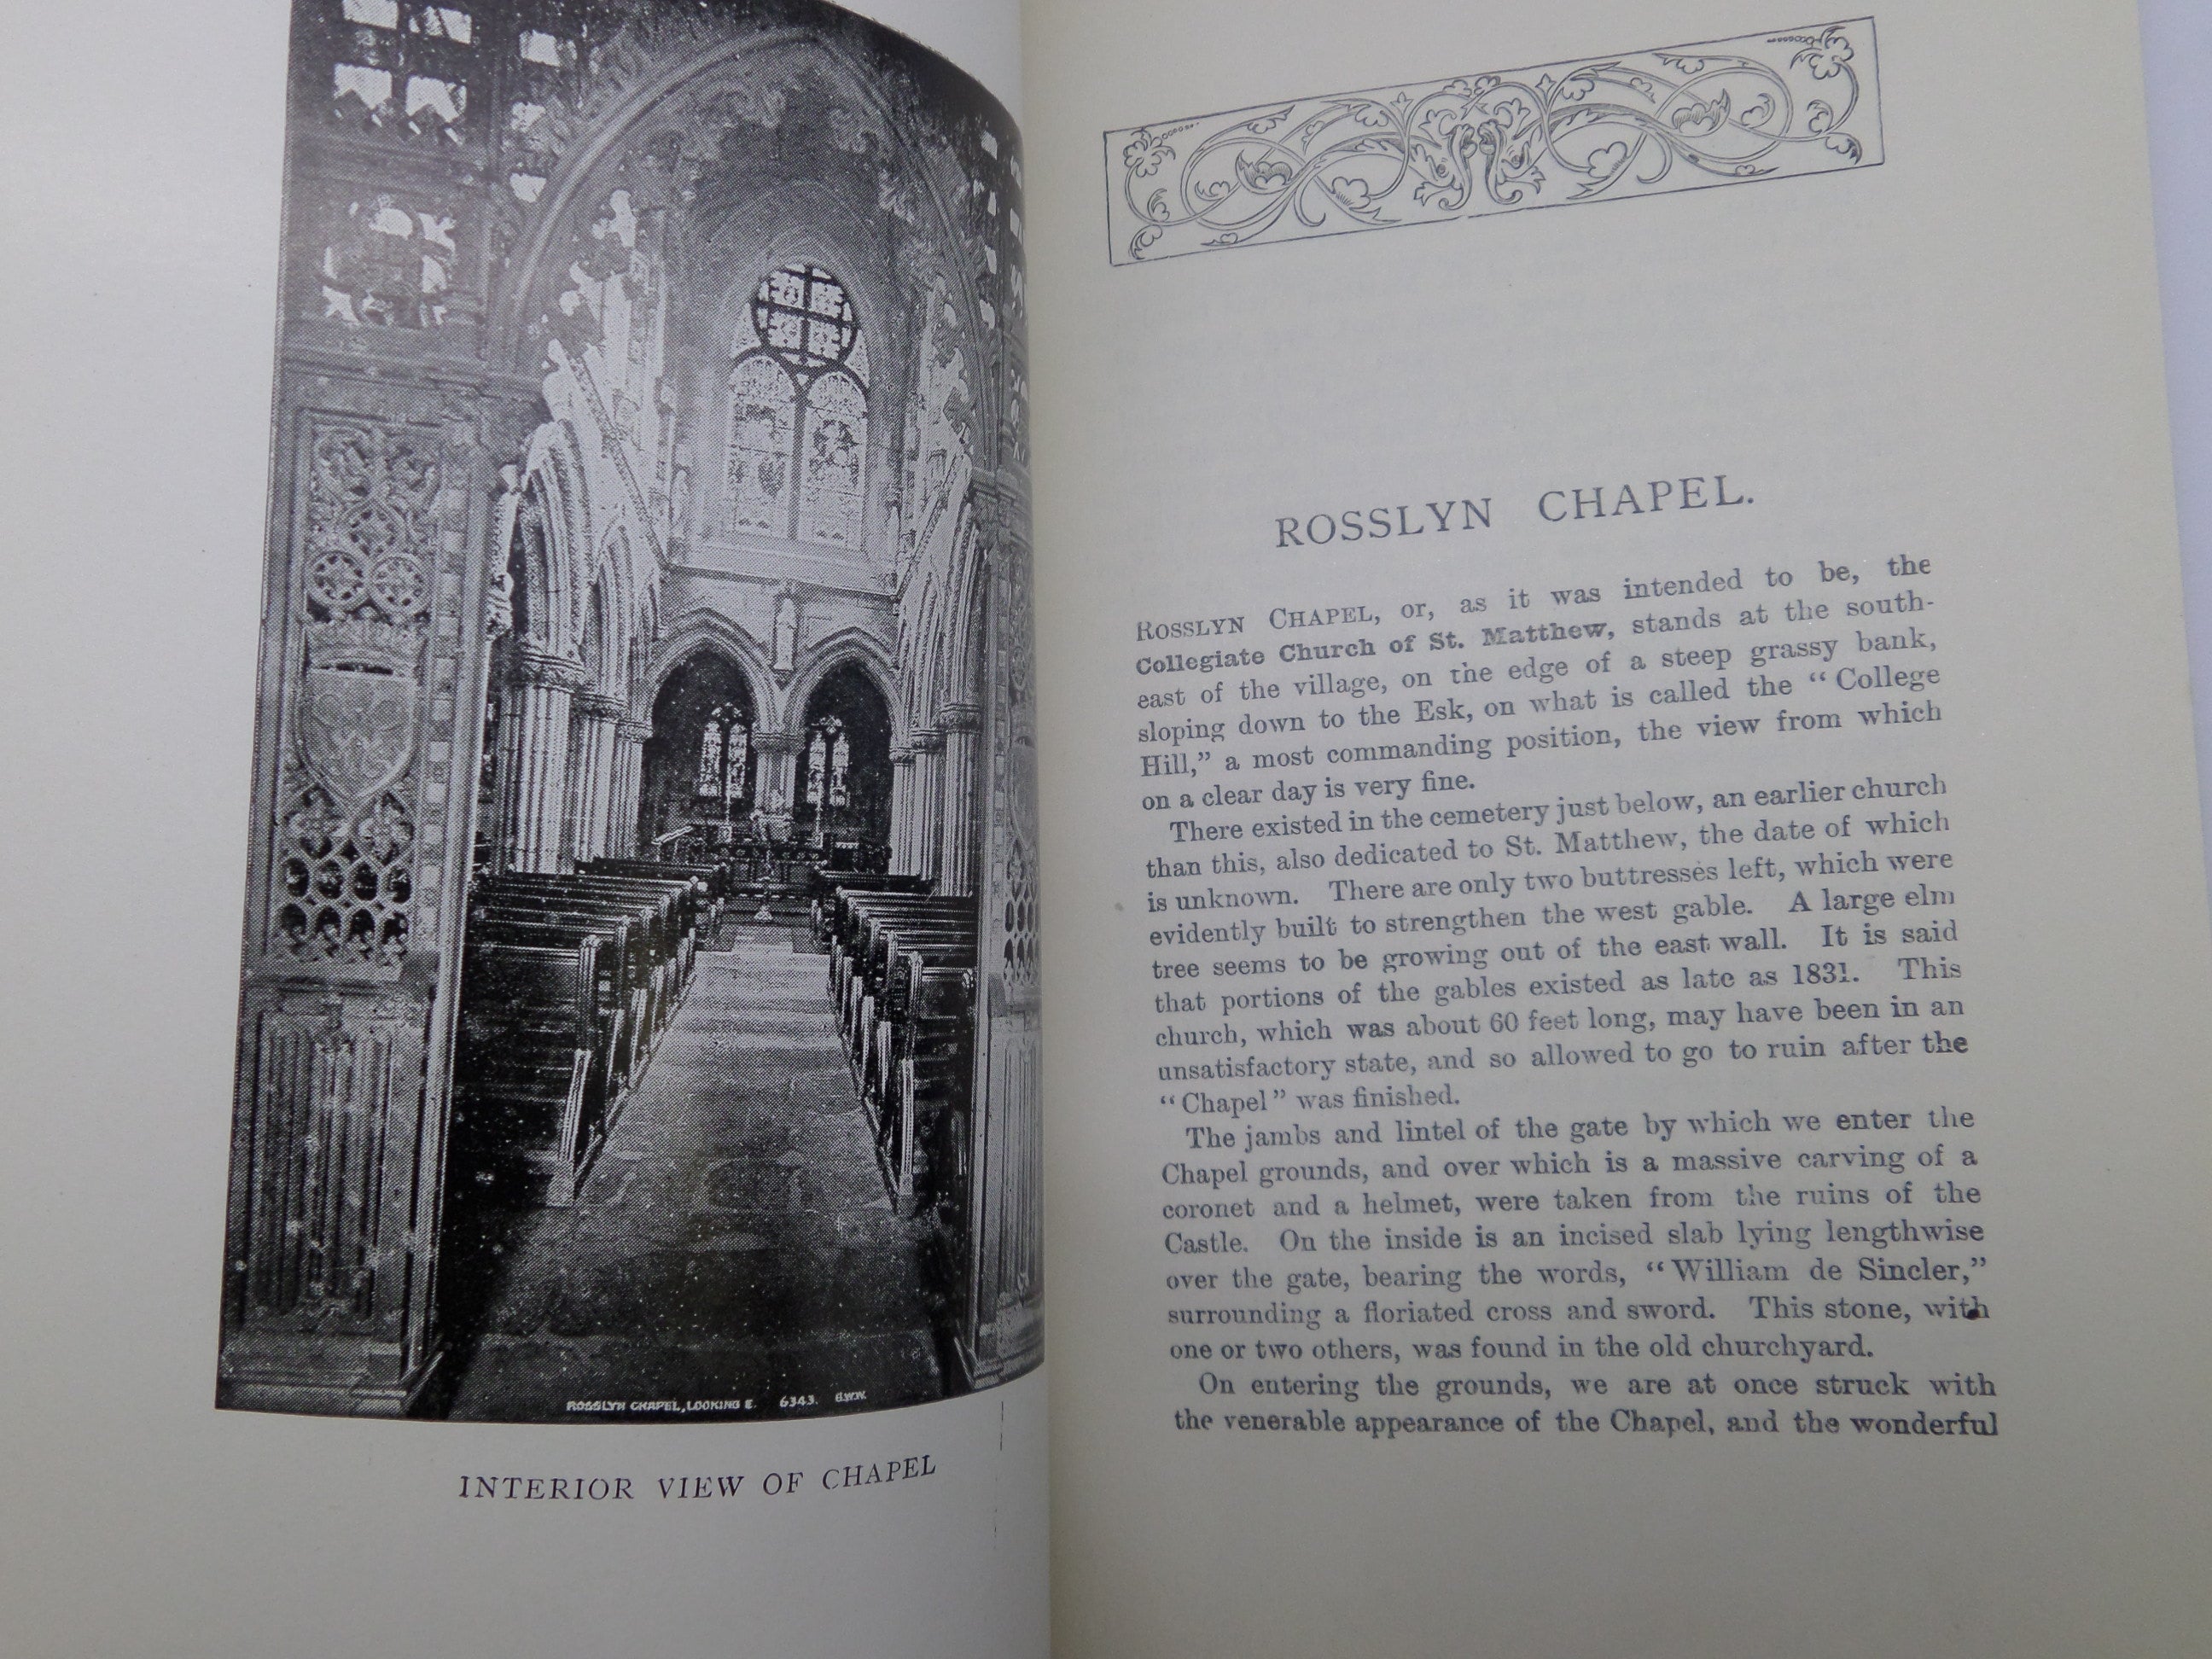 THE ILLUSTRATED GUIDE TO ROSSLYN CHAPEL & CASTLE, HAWTHORNDEN BY JOHN THOMPSON